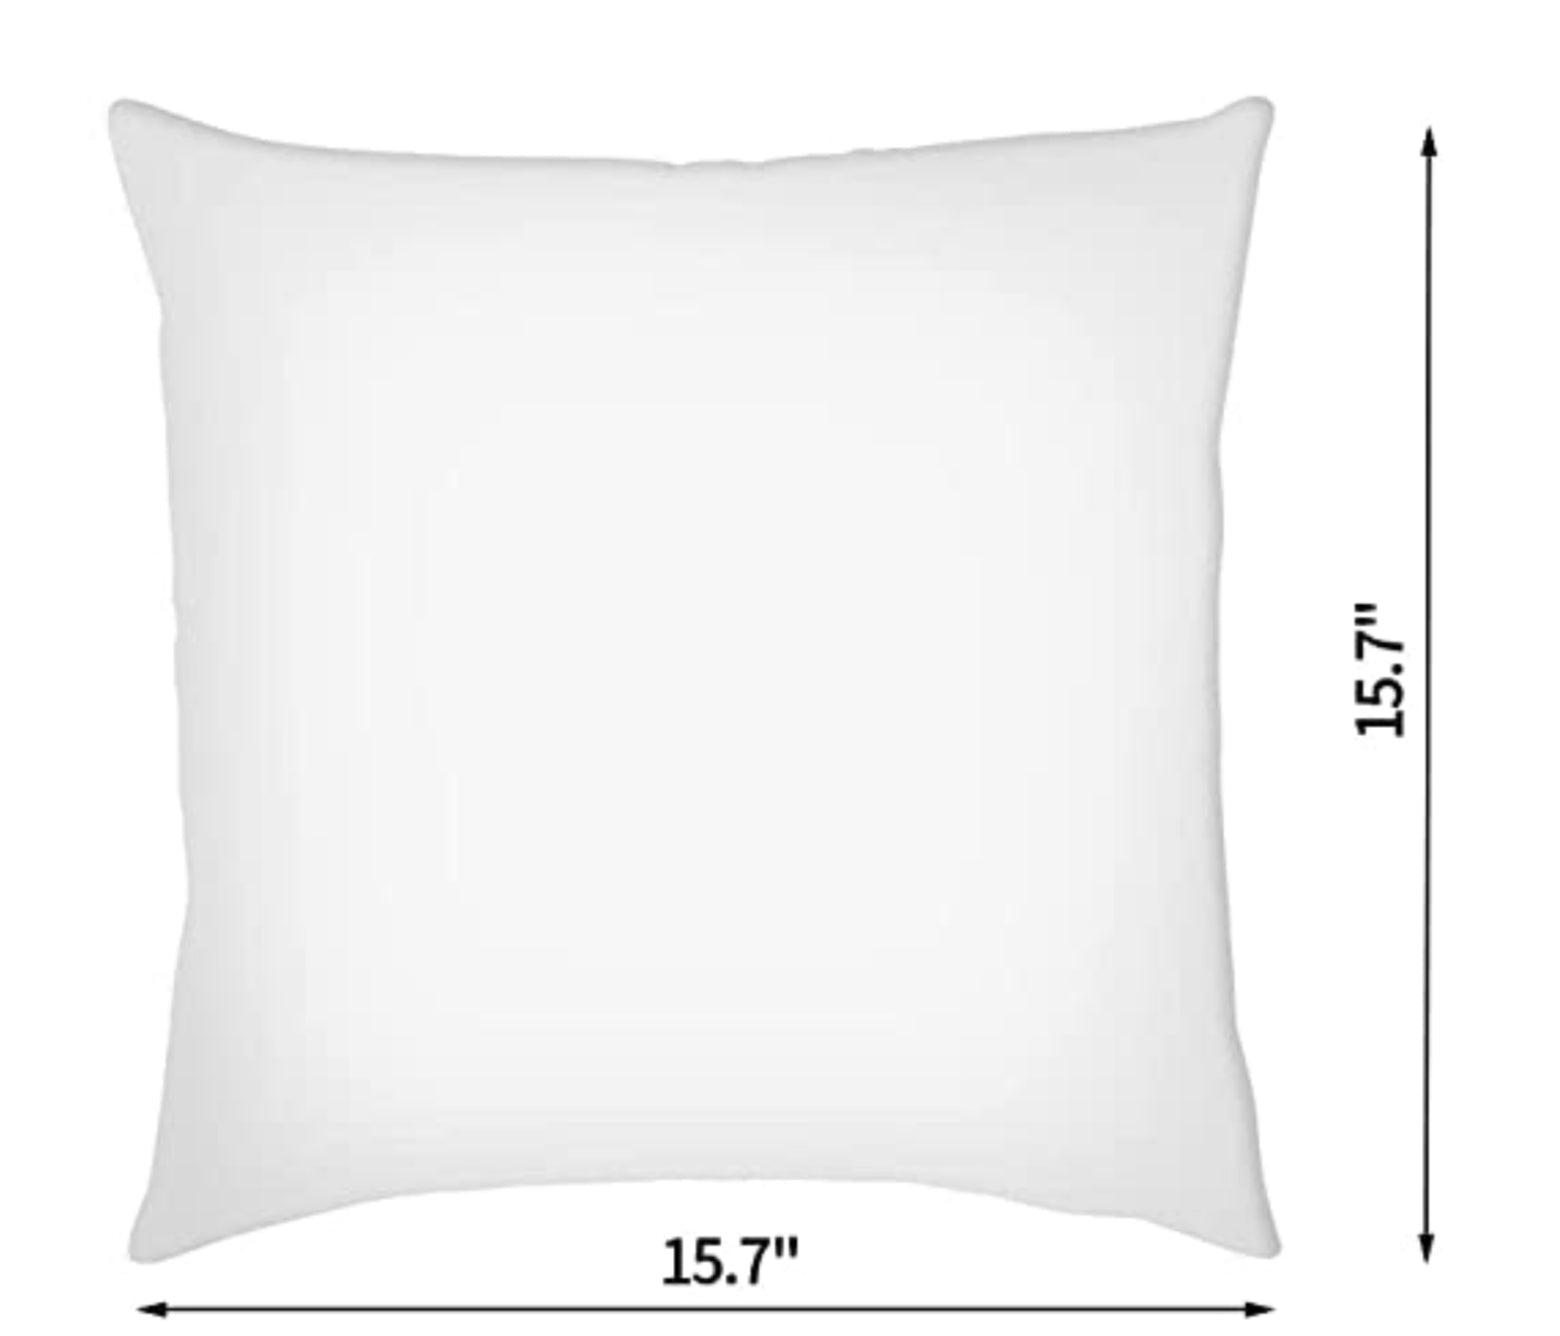 Does This Pillow Smell Like Chloroform To You? - Cushion Cover